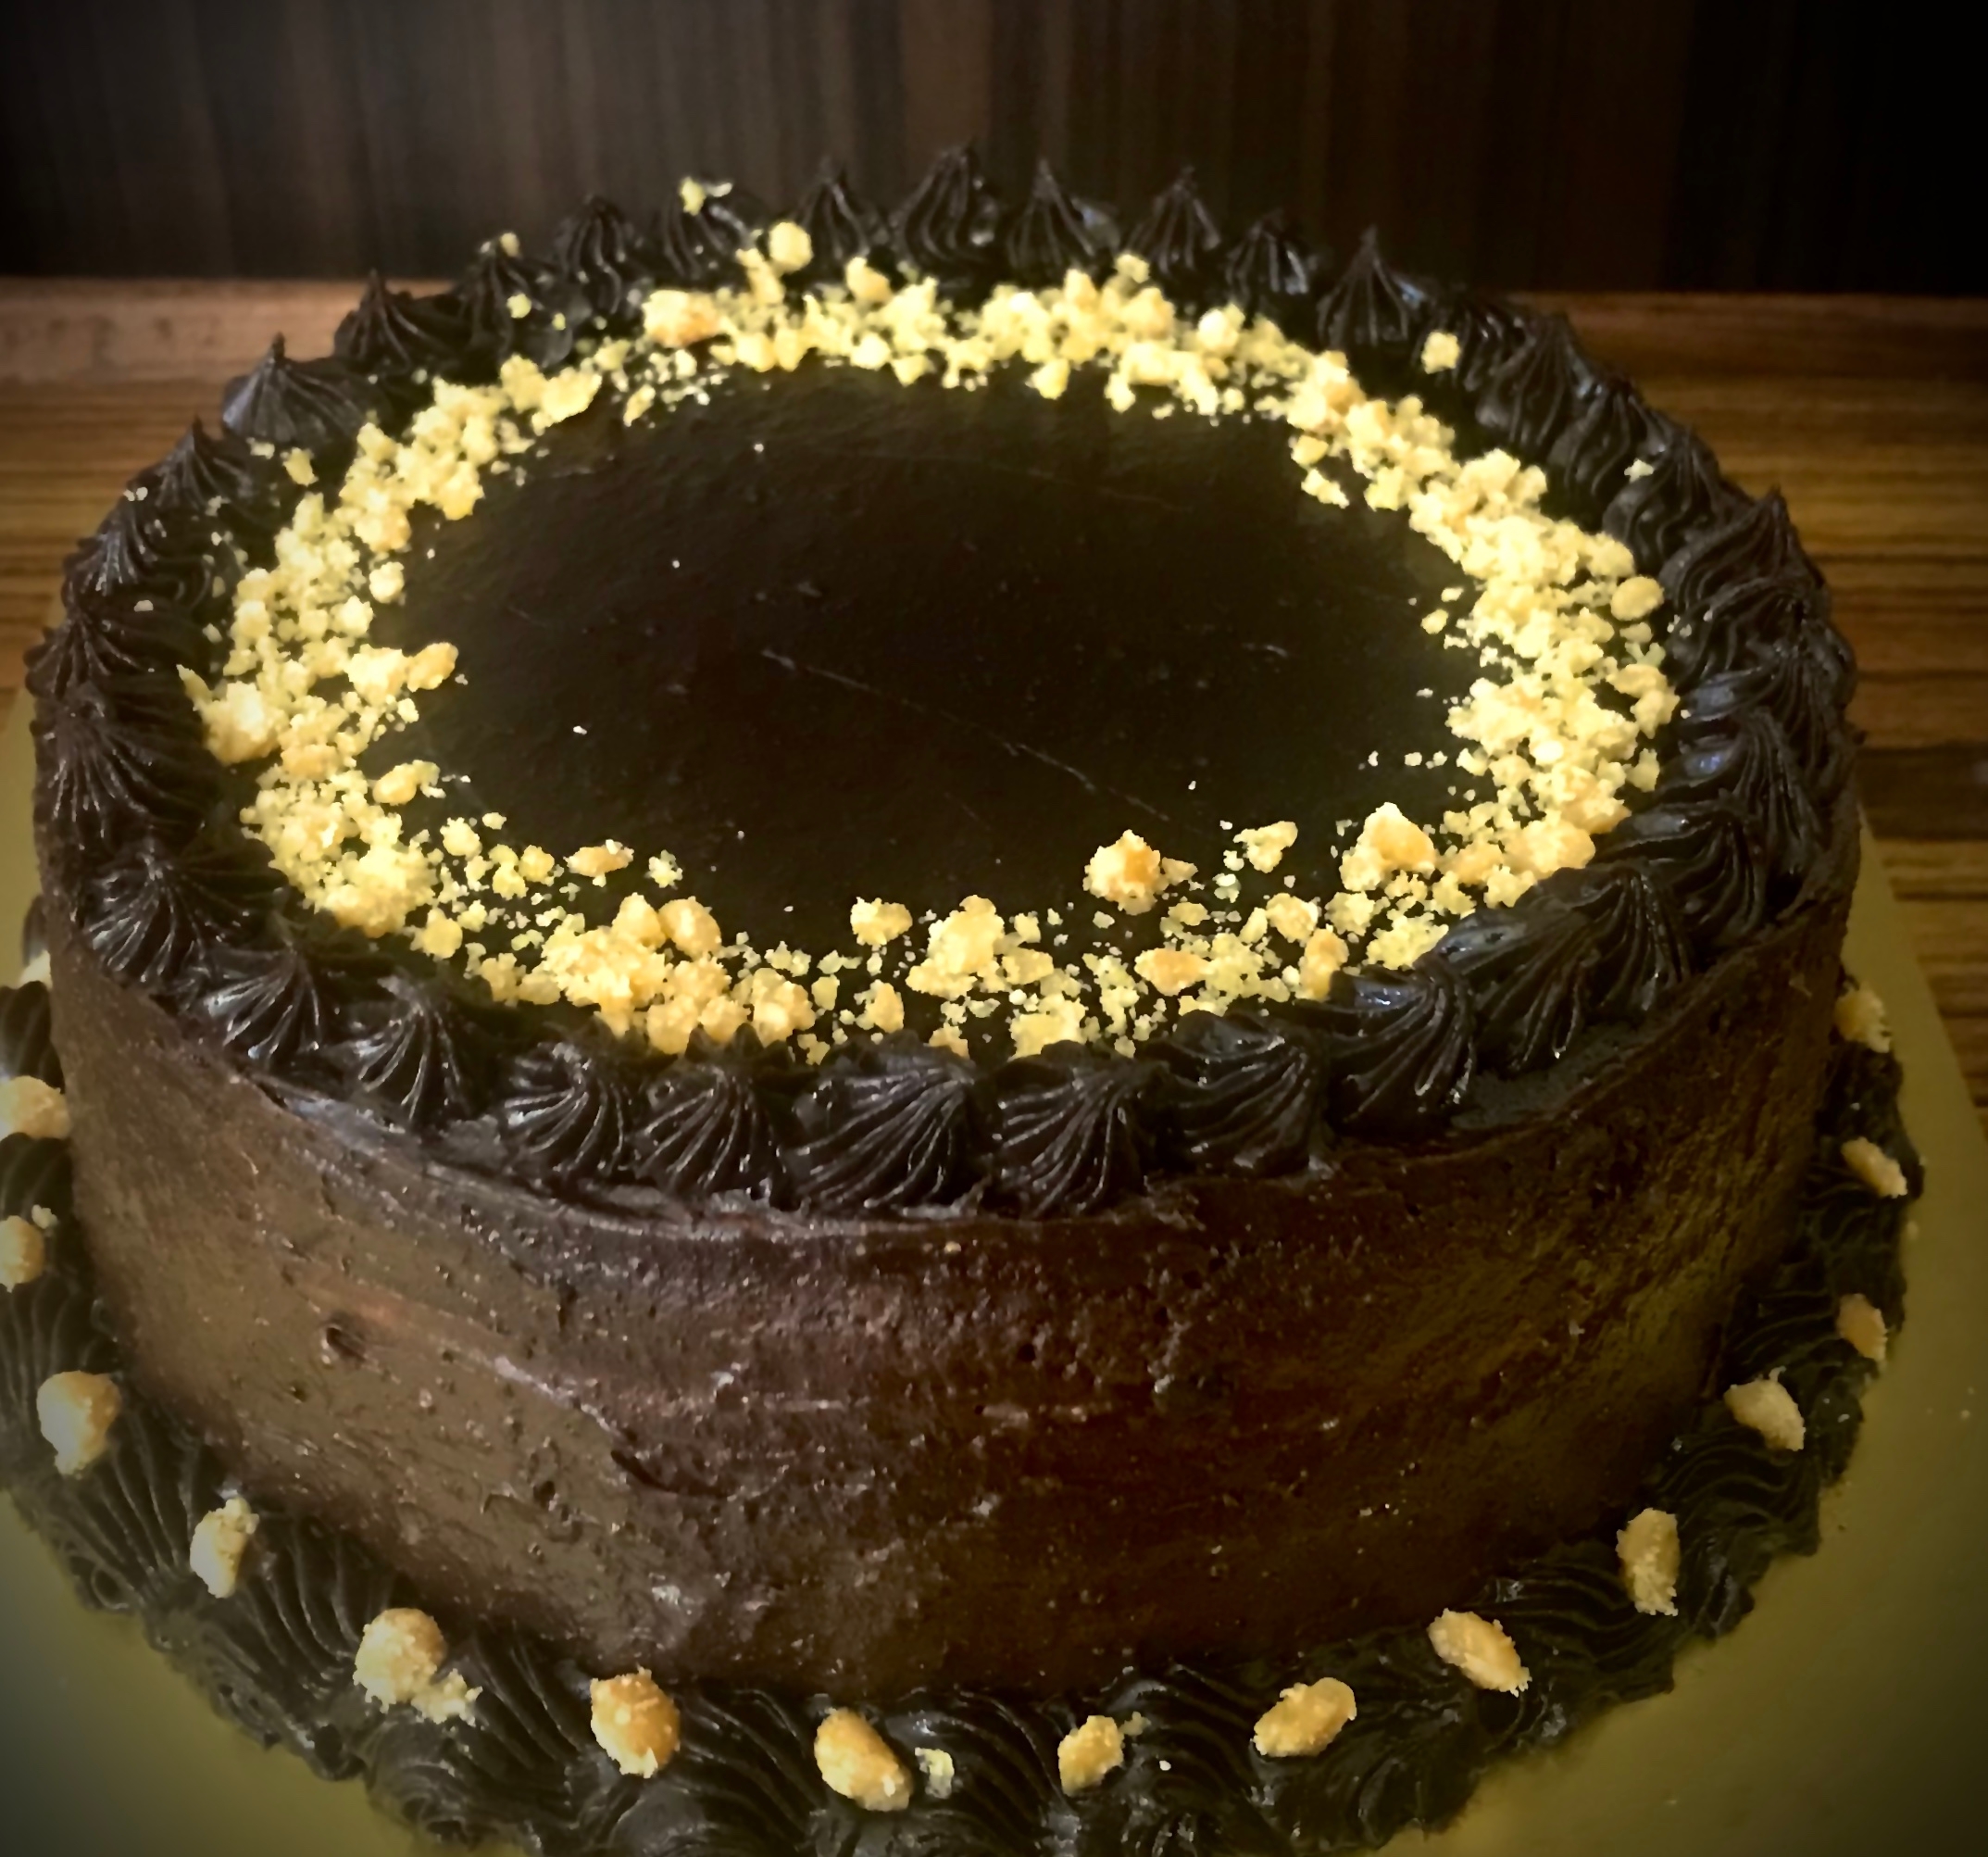 Chocolate toffee crunch cake - Kate the baker